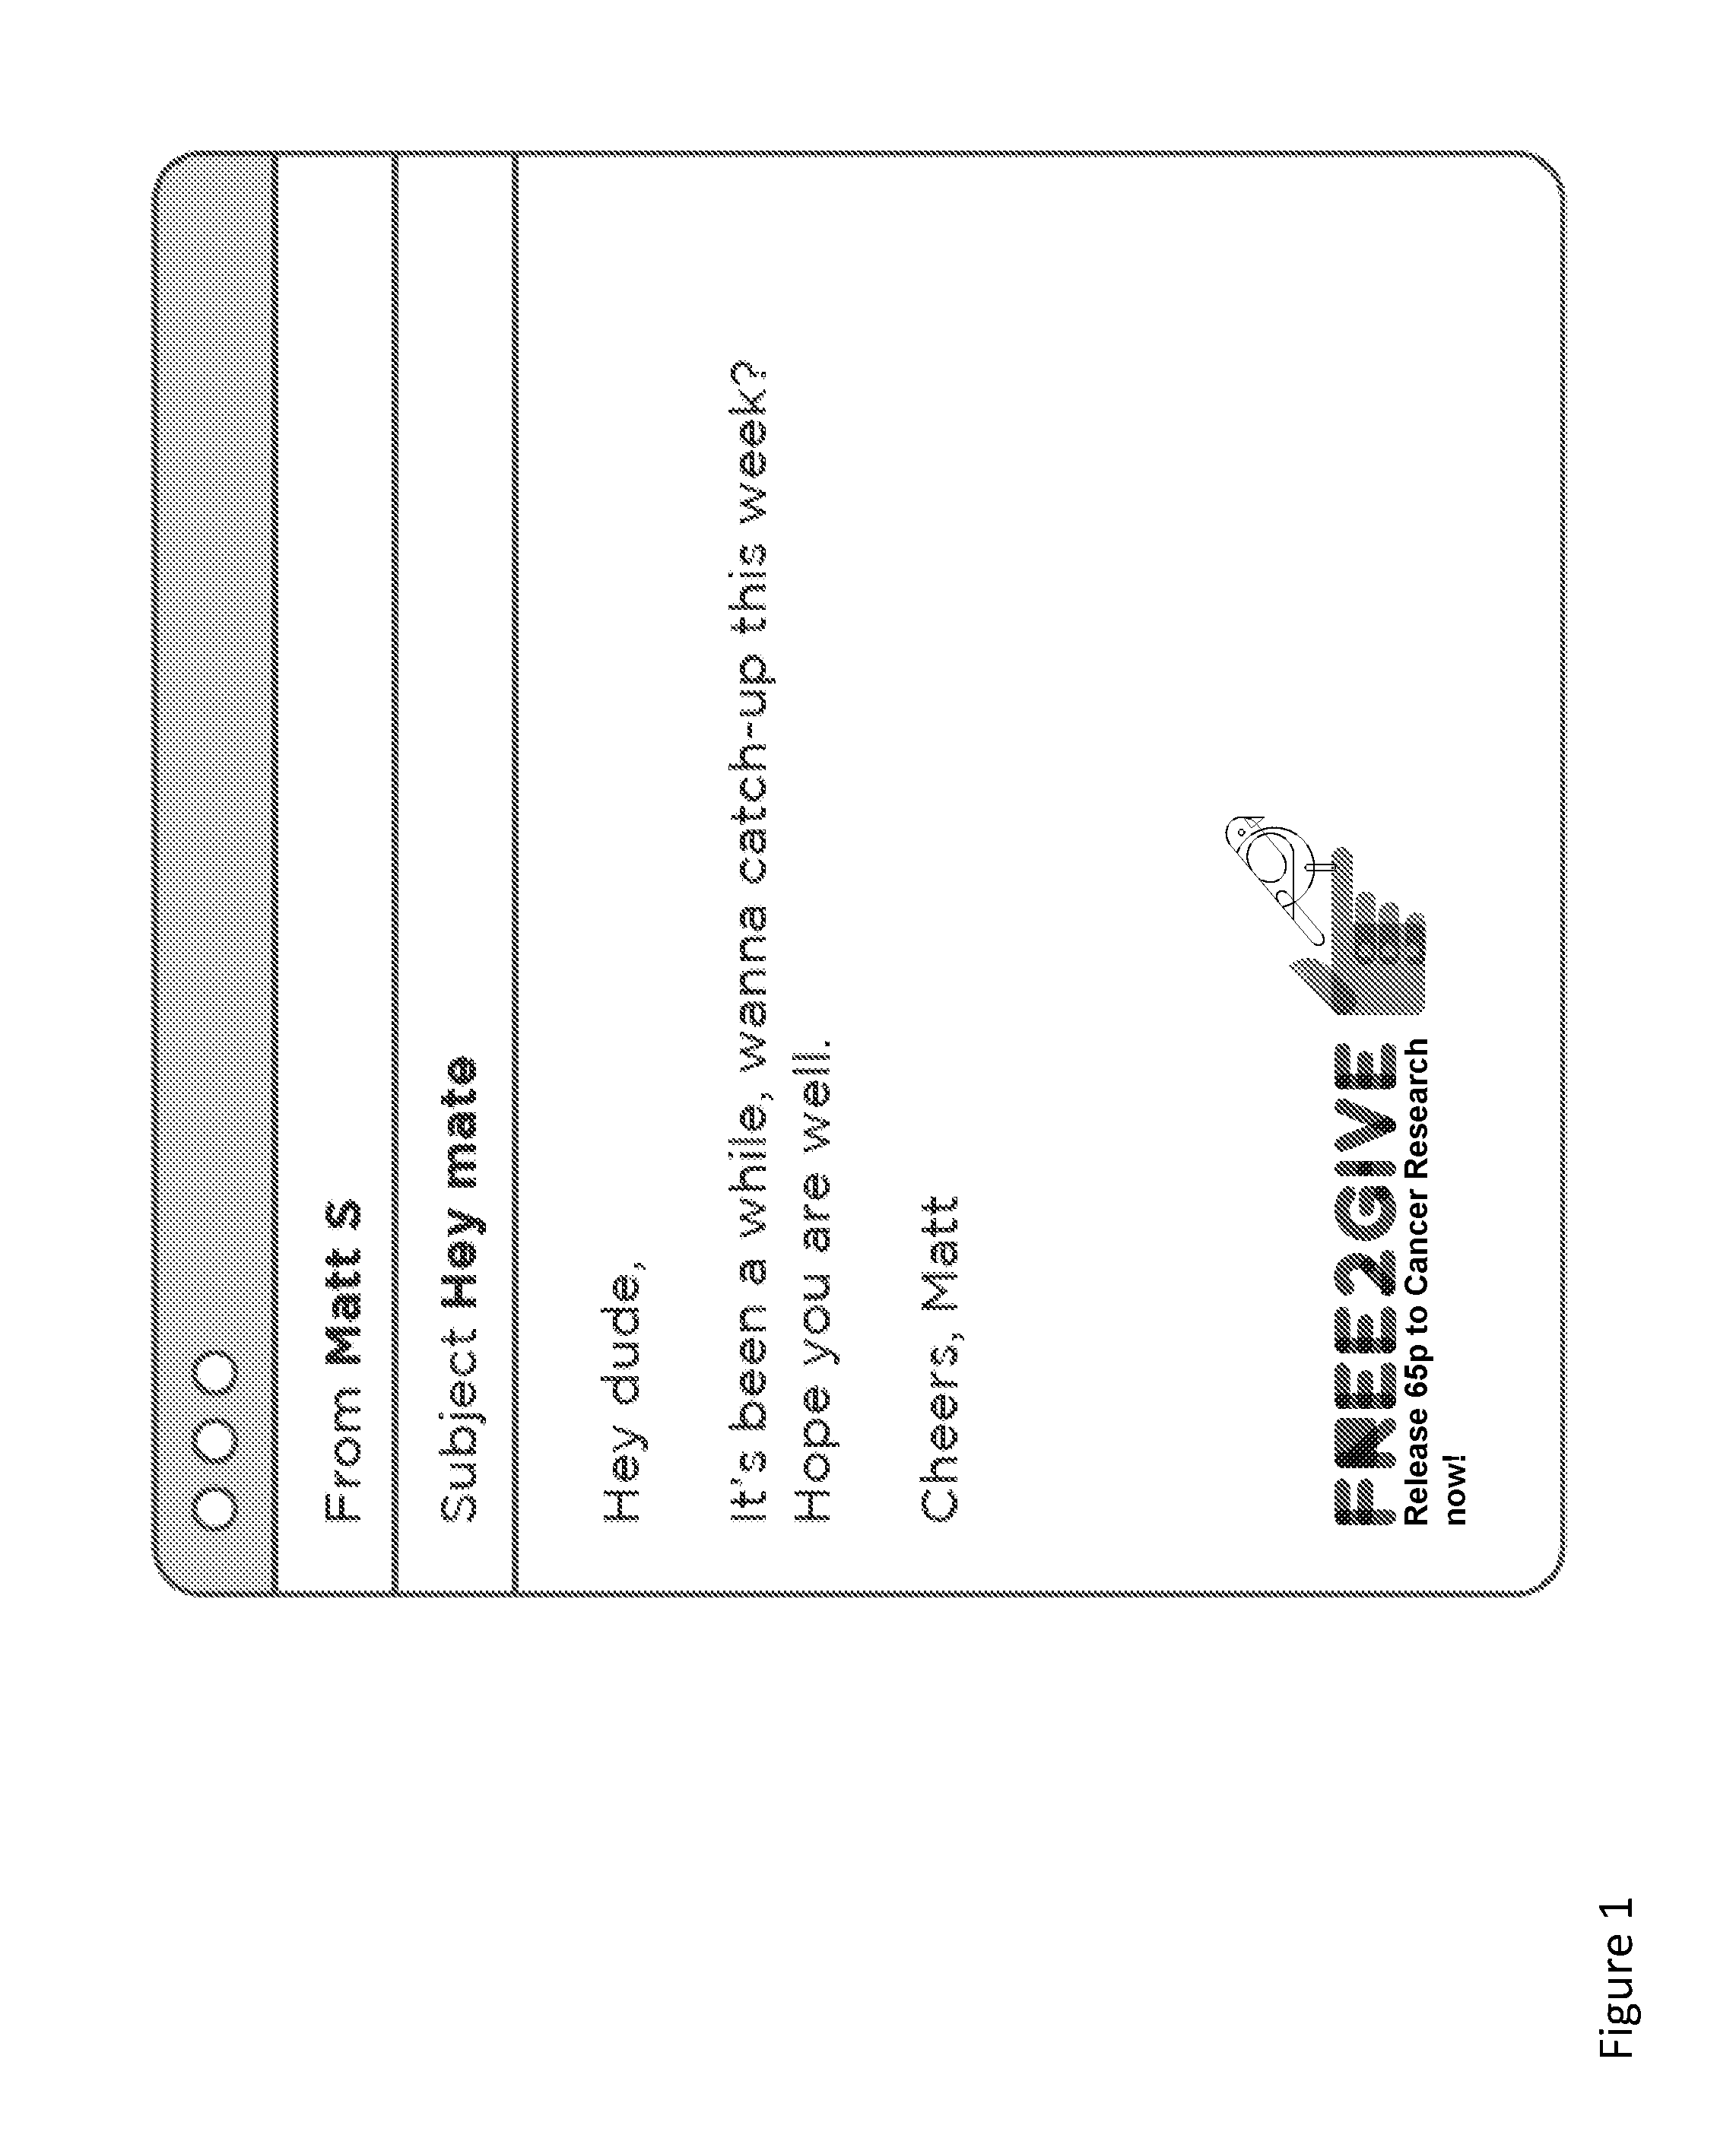 Method of automatically augmenting an electronic message